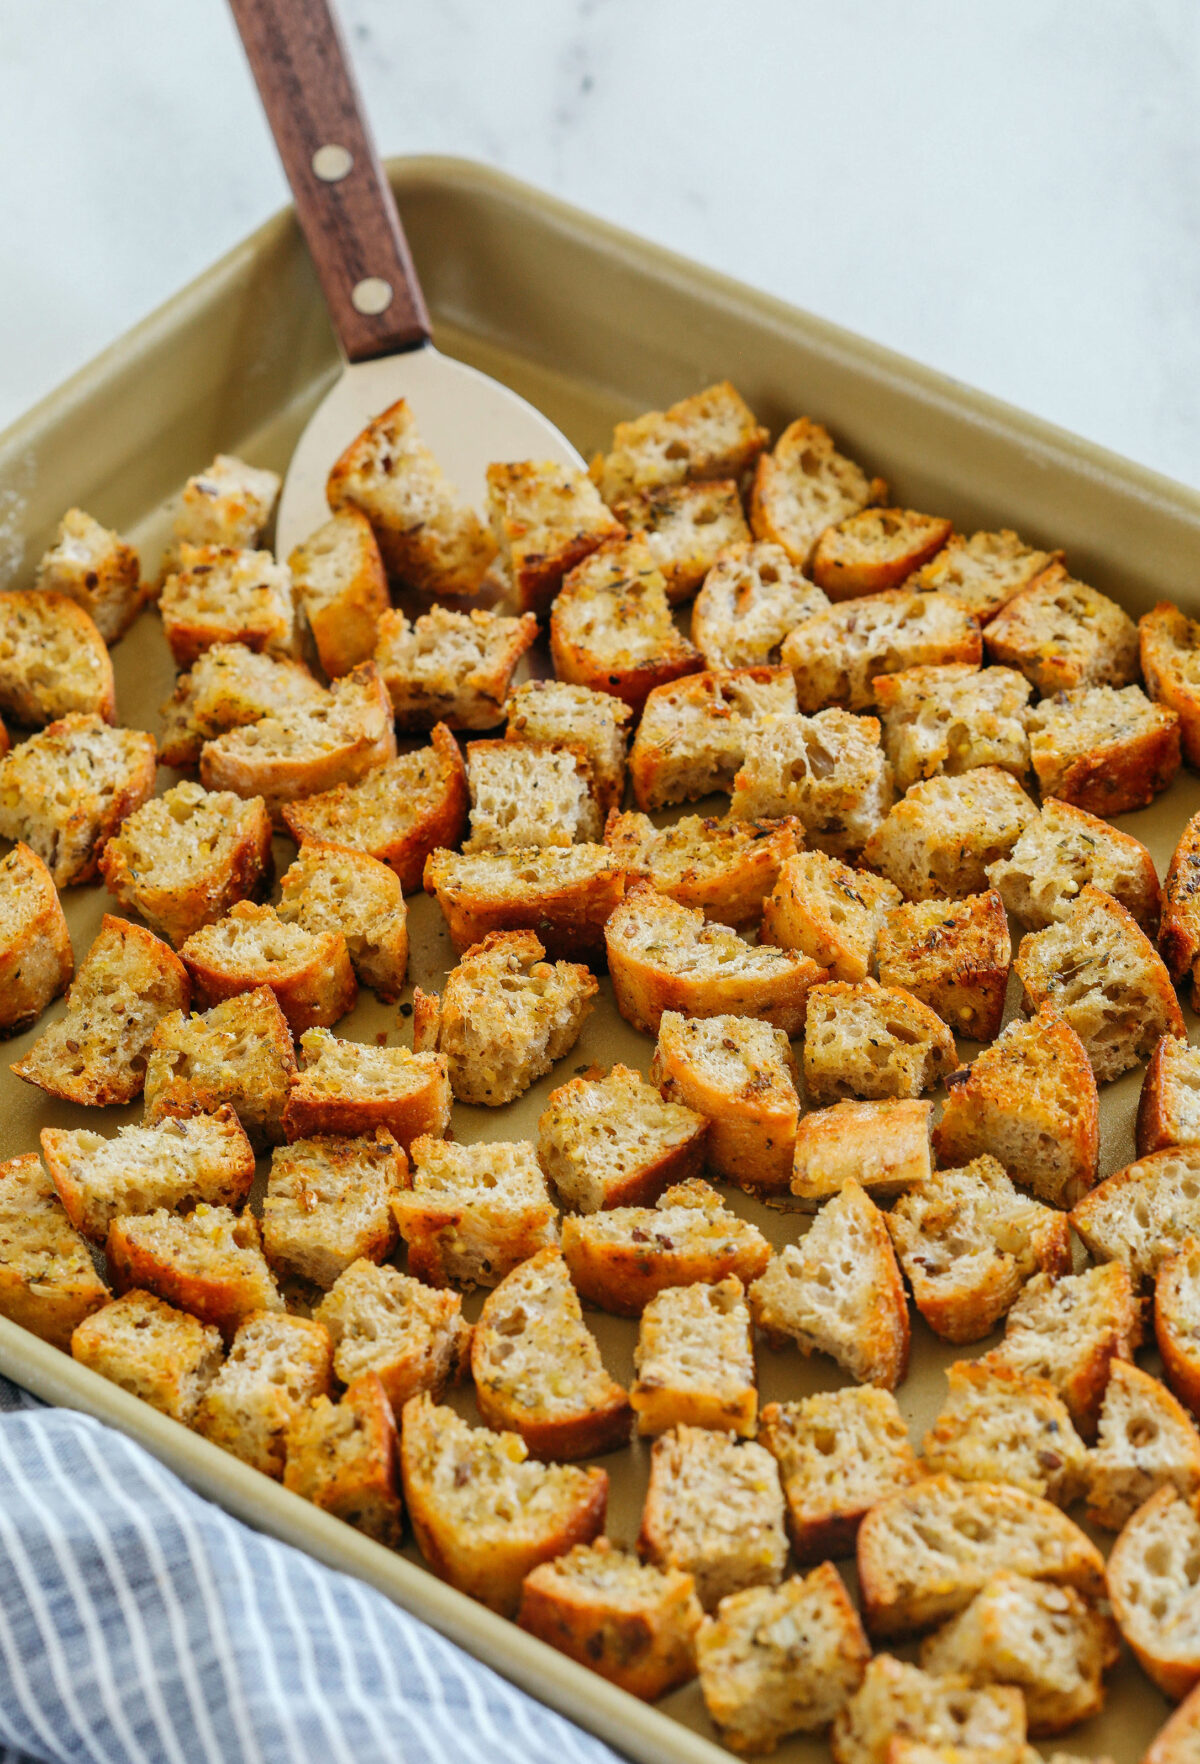 Learn how to make Easy Homemade Croutons that are crispy, garlicky and super quick to make!  Use them as a topping for salads, soups, stuffing and more!